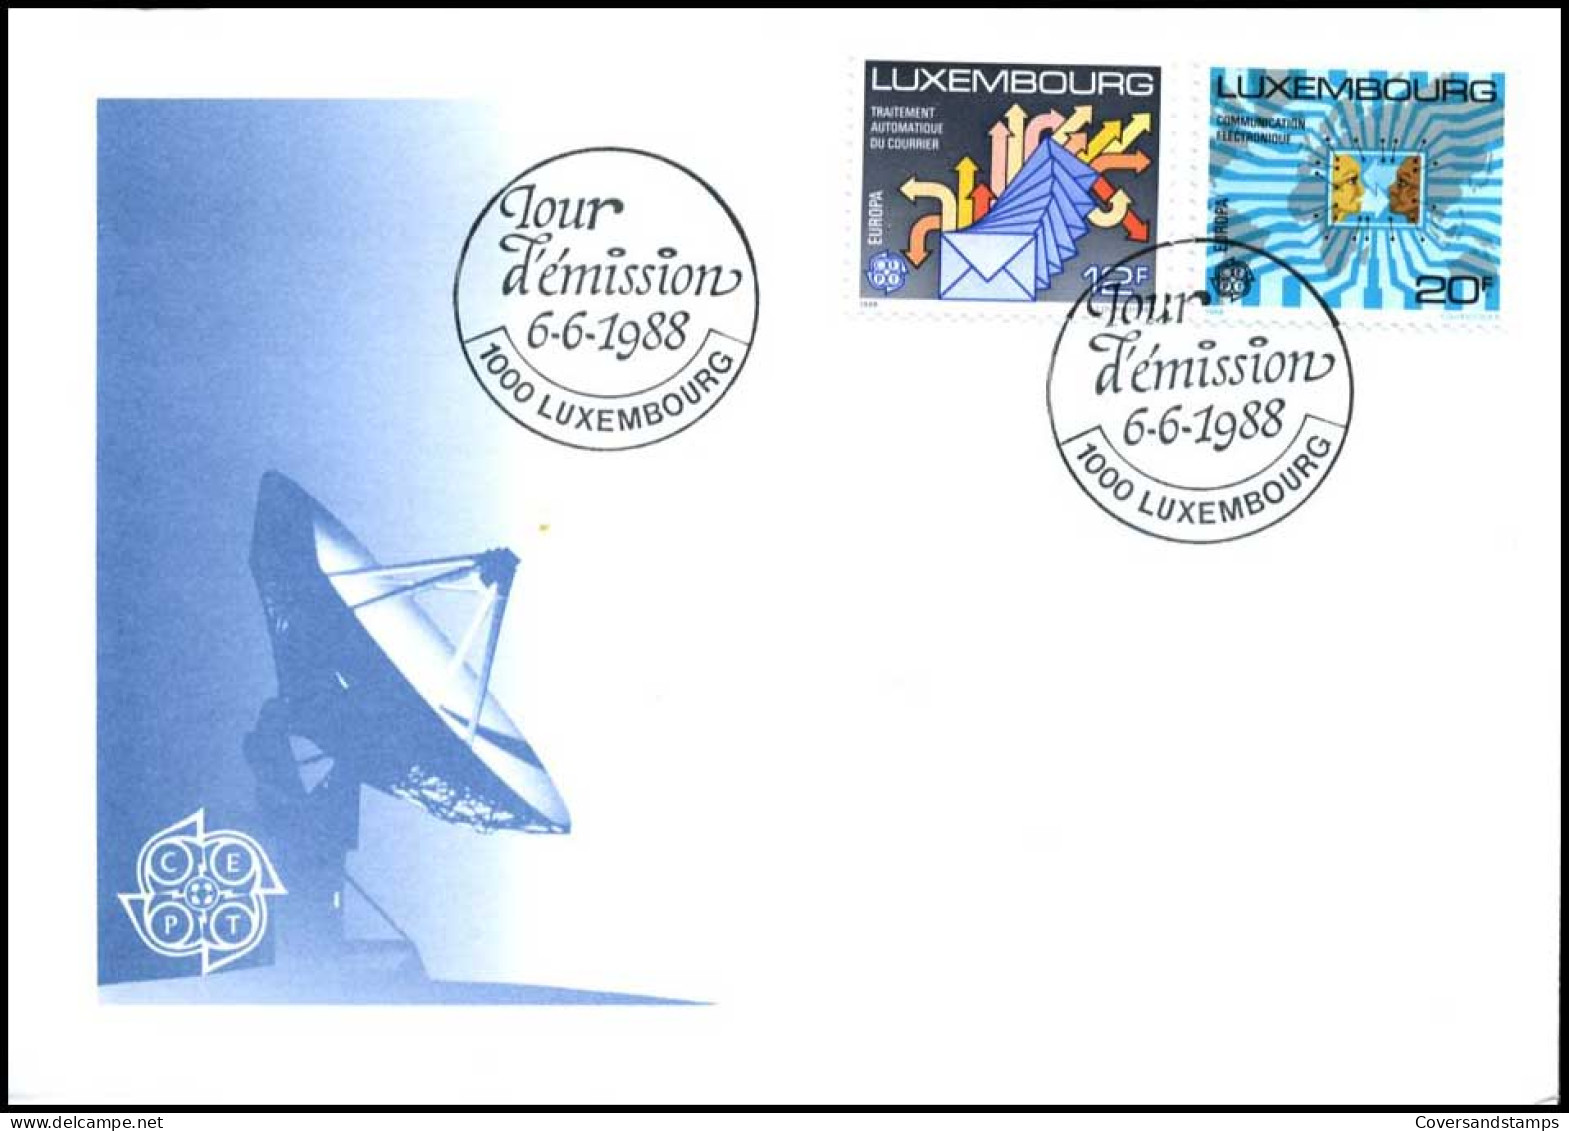  Luxembourg - FDC - Europa CEPT 1988 - 1988